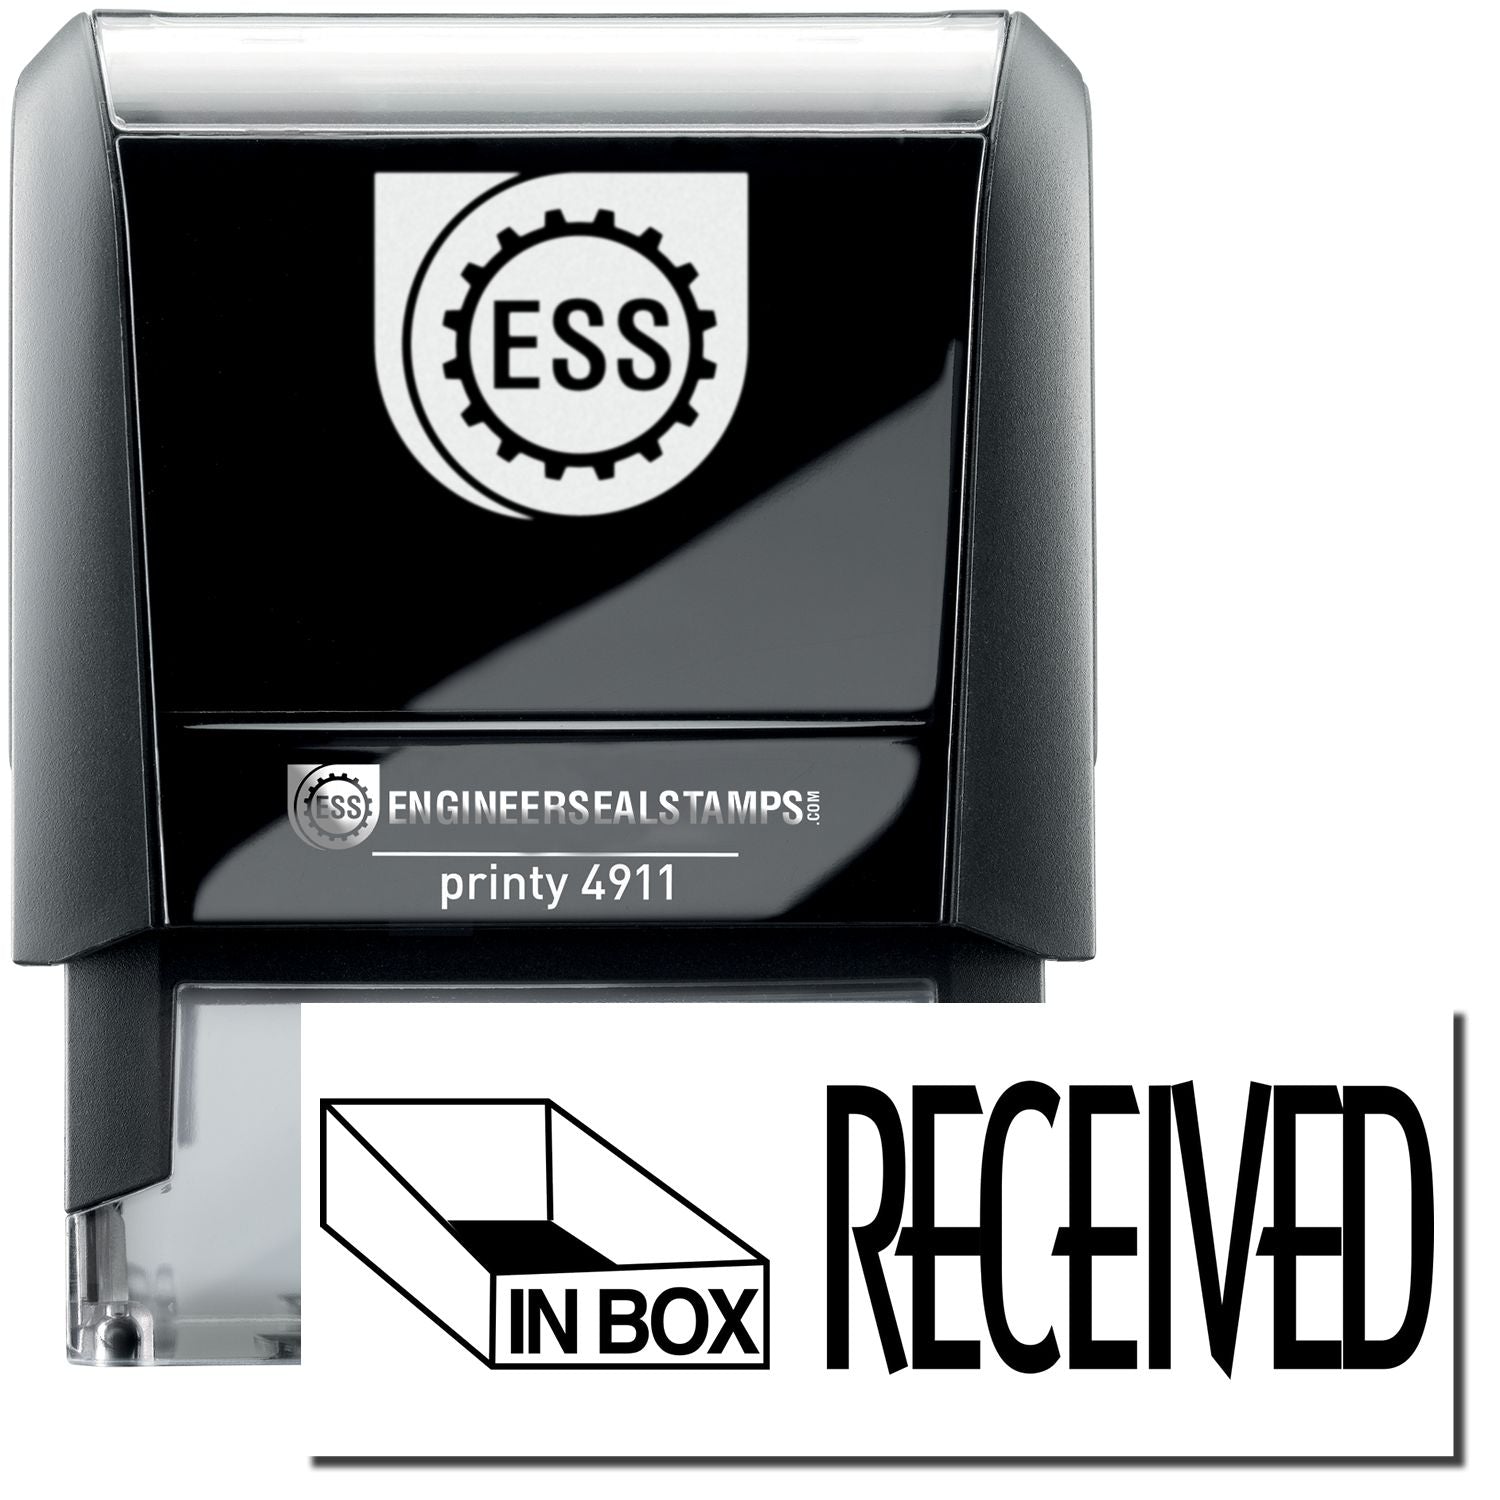 A self-inking stamp with a stamped image showing how the text "RECEIVED" with an in box icon on the left side is displayed after stamping.